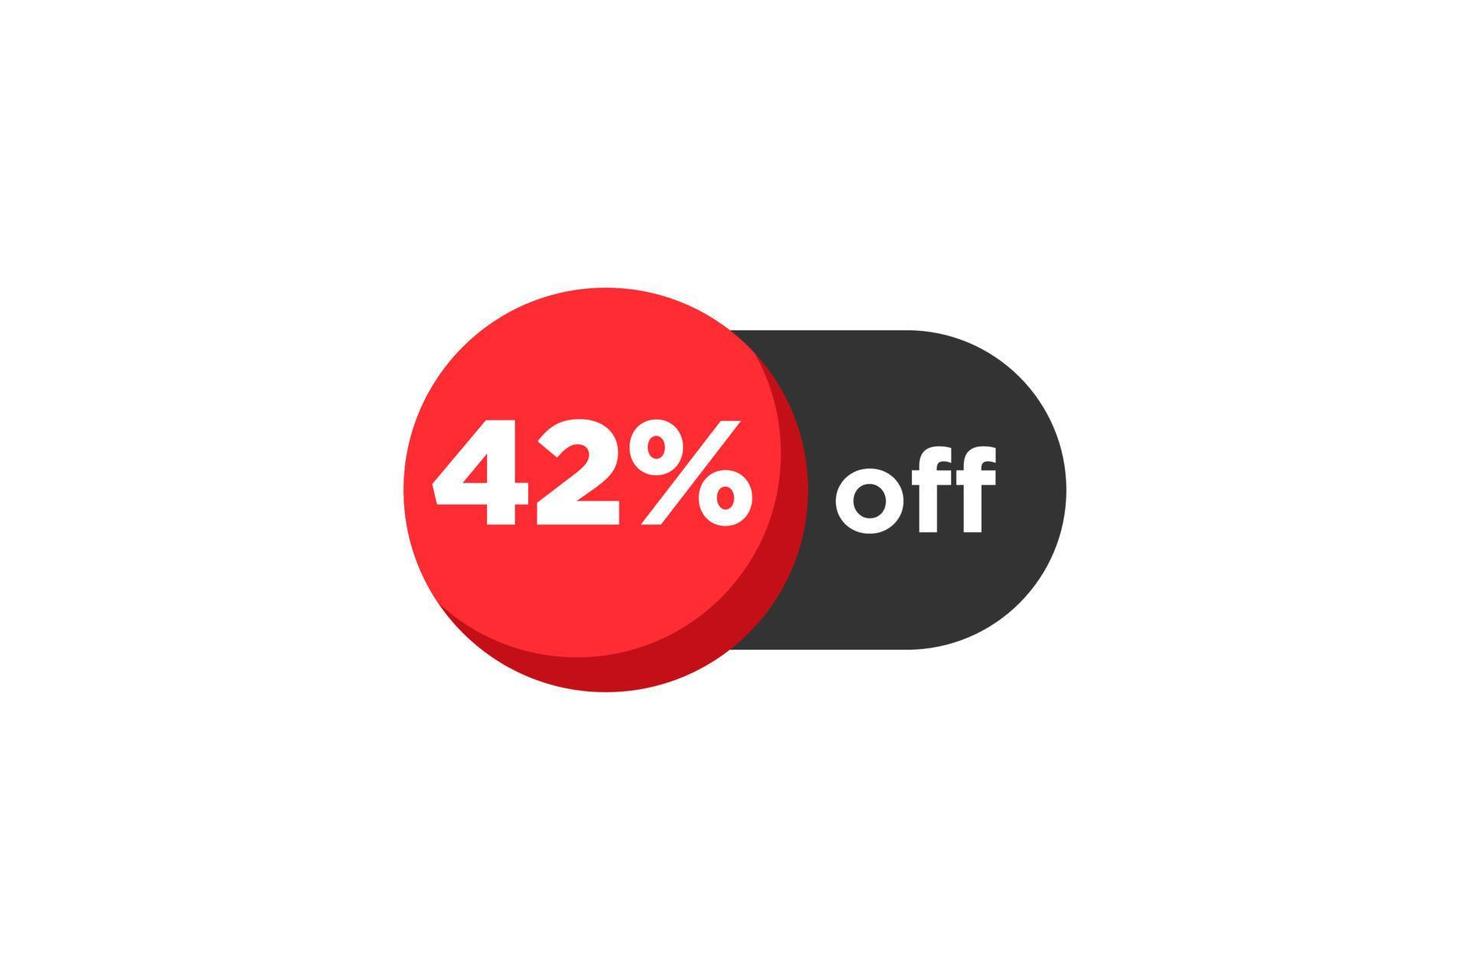 42 discount, Sales Vector badges for Labels, , Stickers, Banners, Tags, Web Stickers, New offer. Discount origami sign banner.